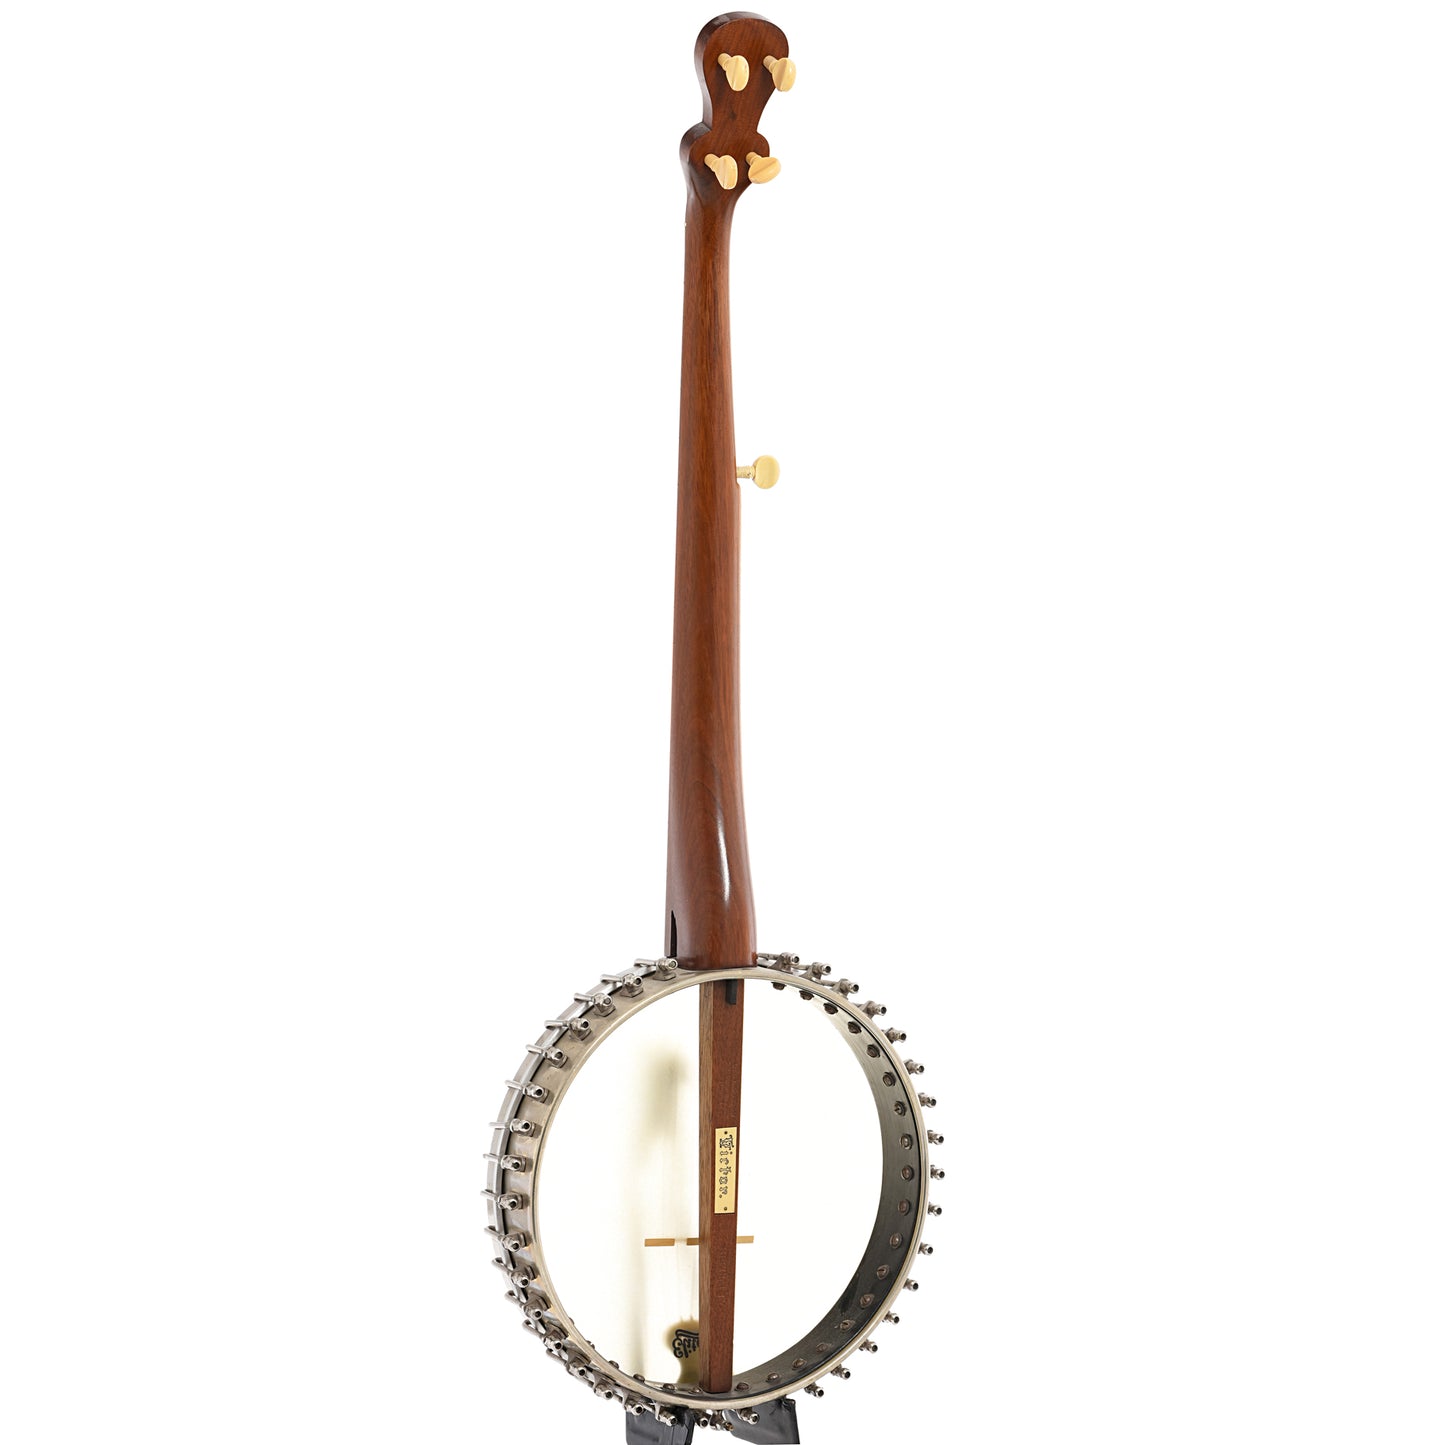 Full back and side of Dobson Victor No.2 Specialty Openback Banjo (c.1887)